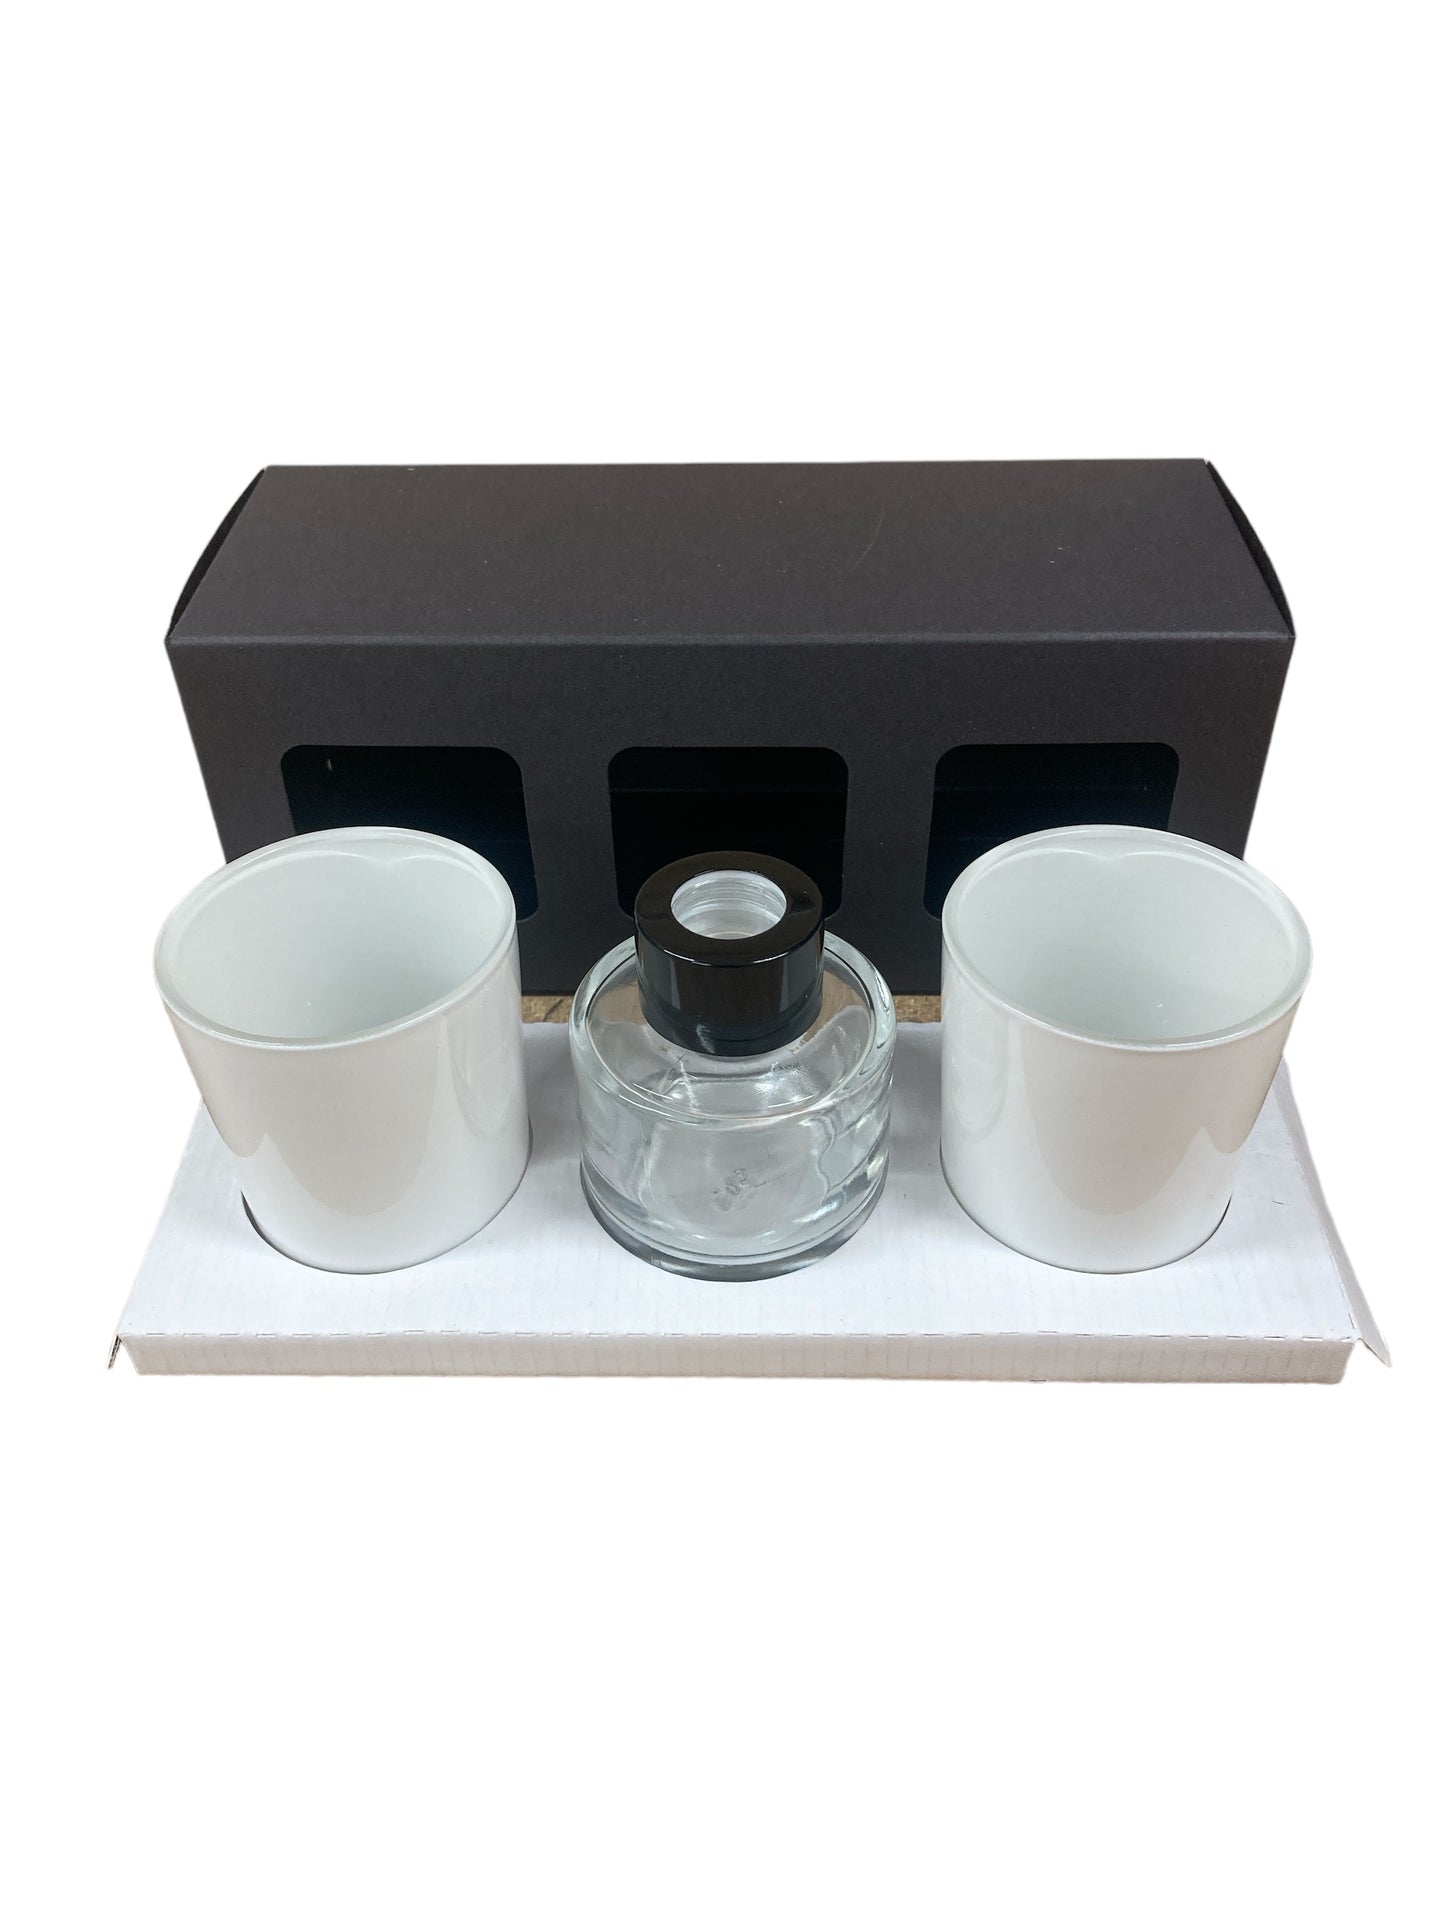 2 X 9CL VOTIVES AND 50ML DIFFUSER GIFT CANDLE BOX - BLACK (Pack of 10)